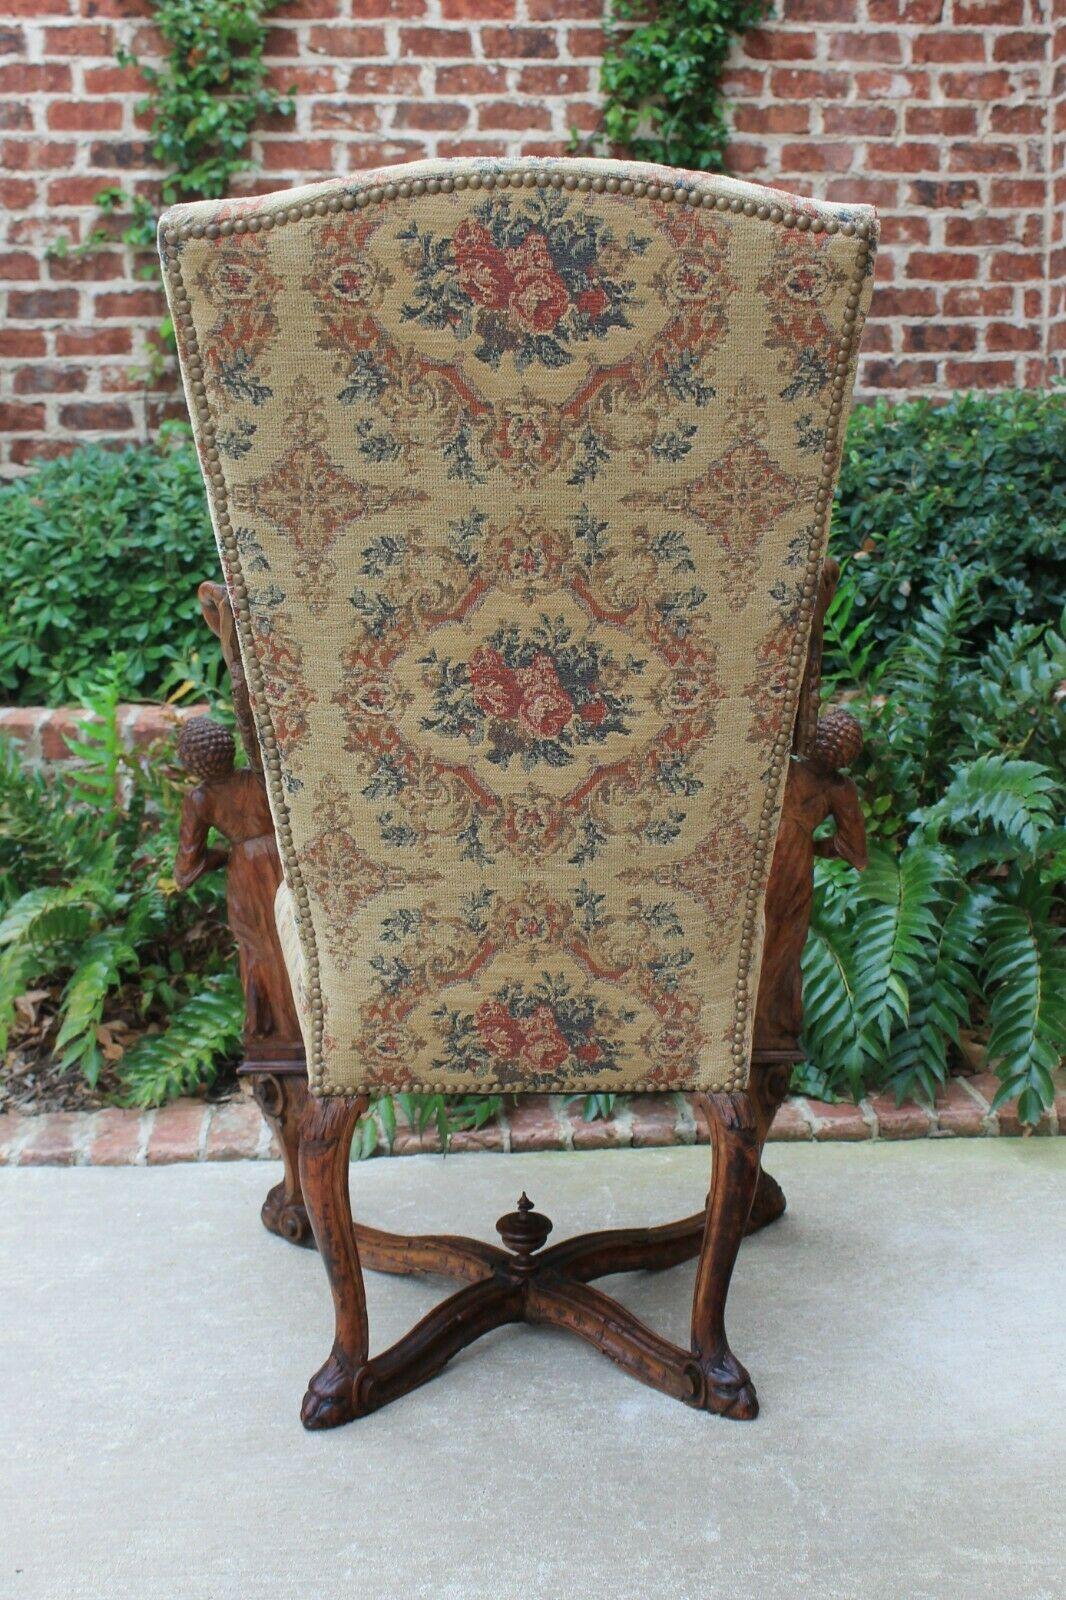 Antique Italian Besarel Walnut Arm Chair Baroque Upholstered Mid-19th C Rare For Sale 6